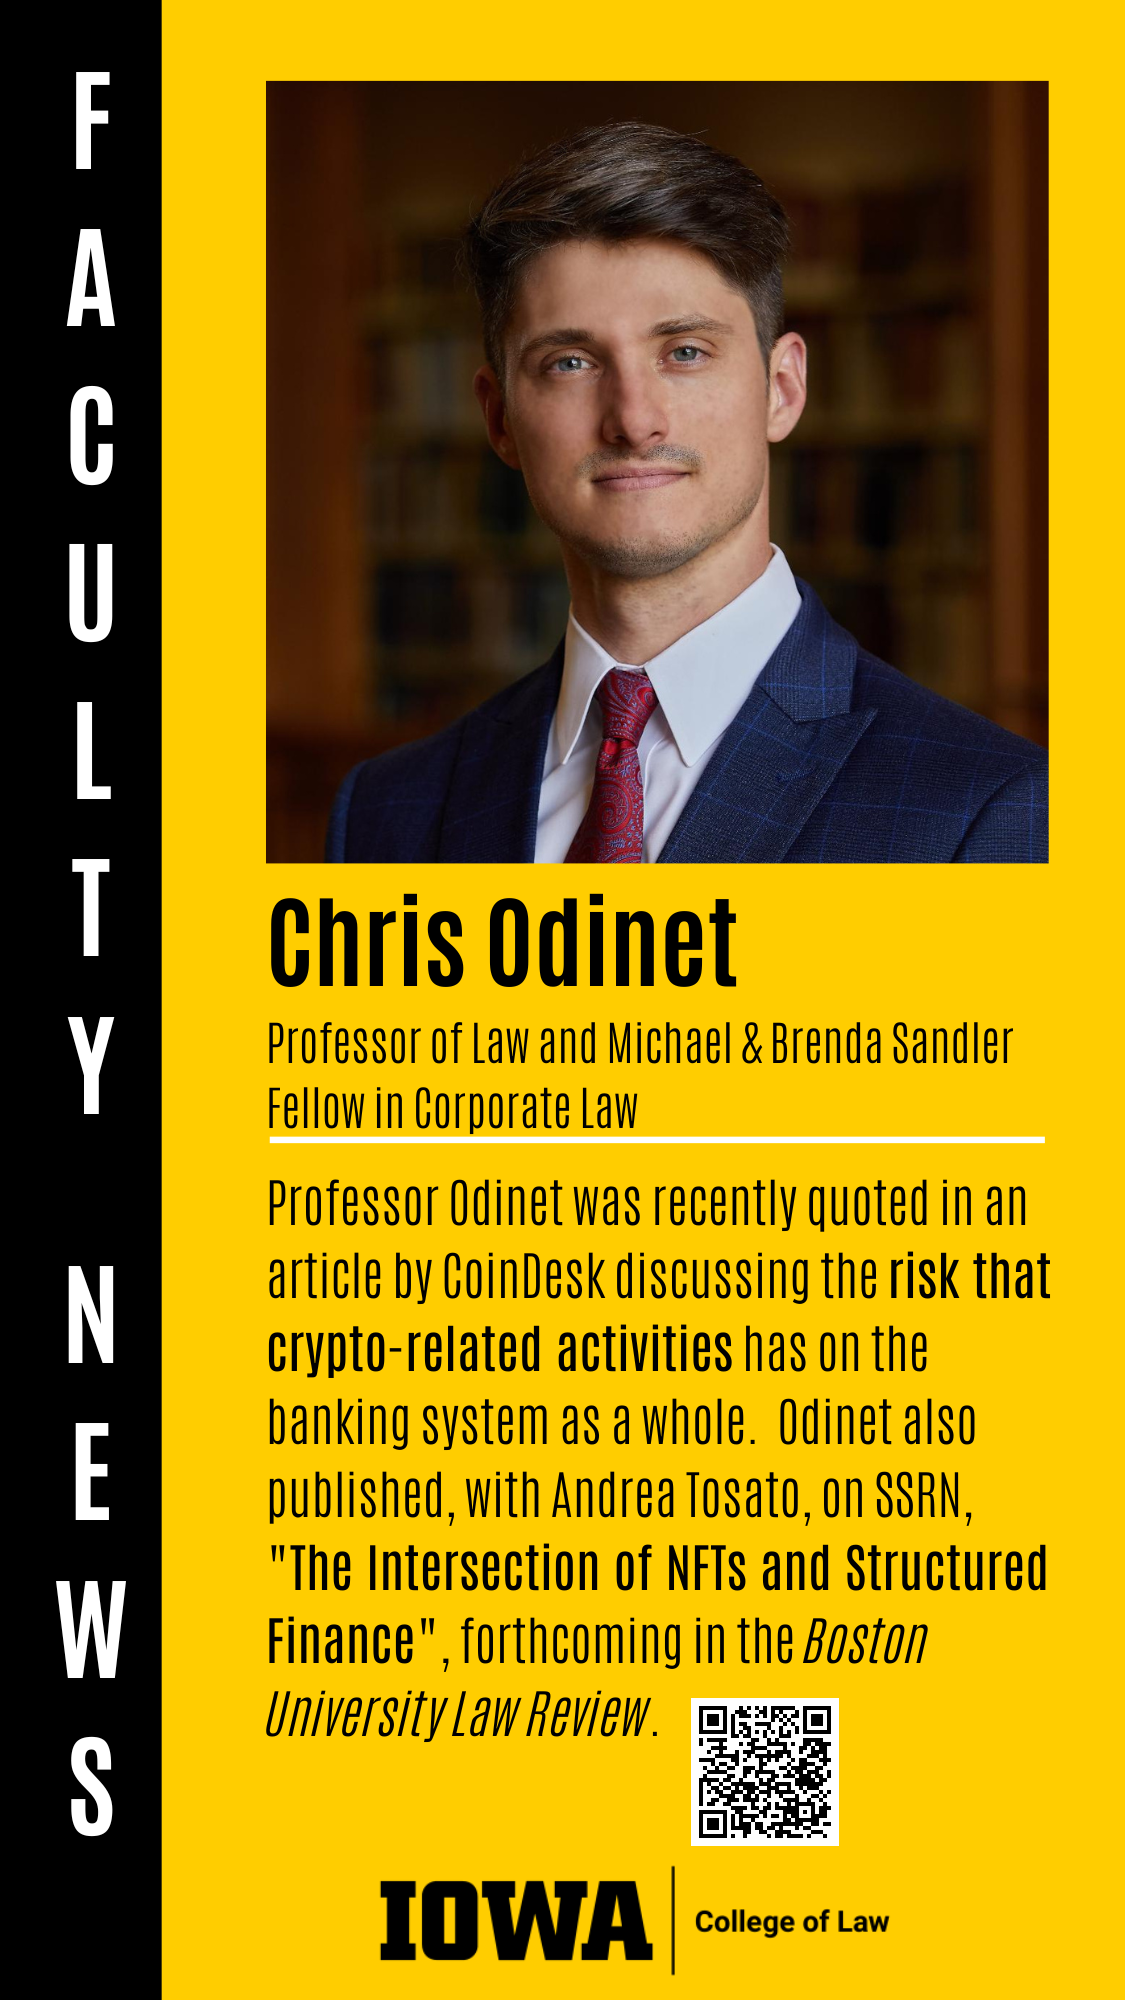 Professor of Law and Michael & Brenda Sandler Fellow in Corporate Law Professor Odinet was recently quoted in an article by CoinDesk discussing the risk that crypto-related activities has on the banking system as a whole.  Odinet also published, with Andrea Tosato, on SSRN, "The Intersection of NFTs and Structured Finance", forthcoming in the Boston University Law Review. Chris Odinet